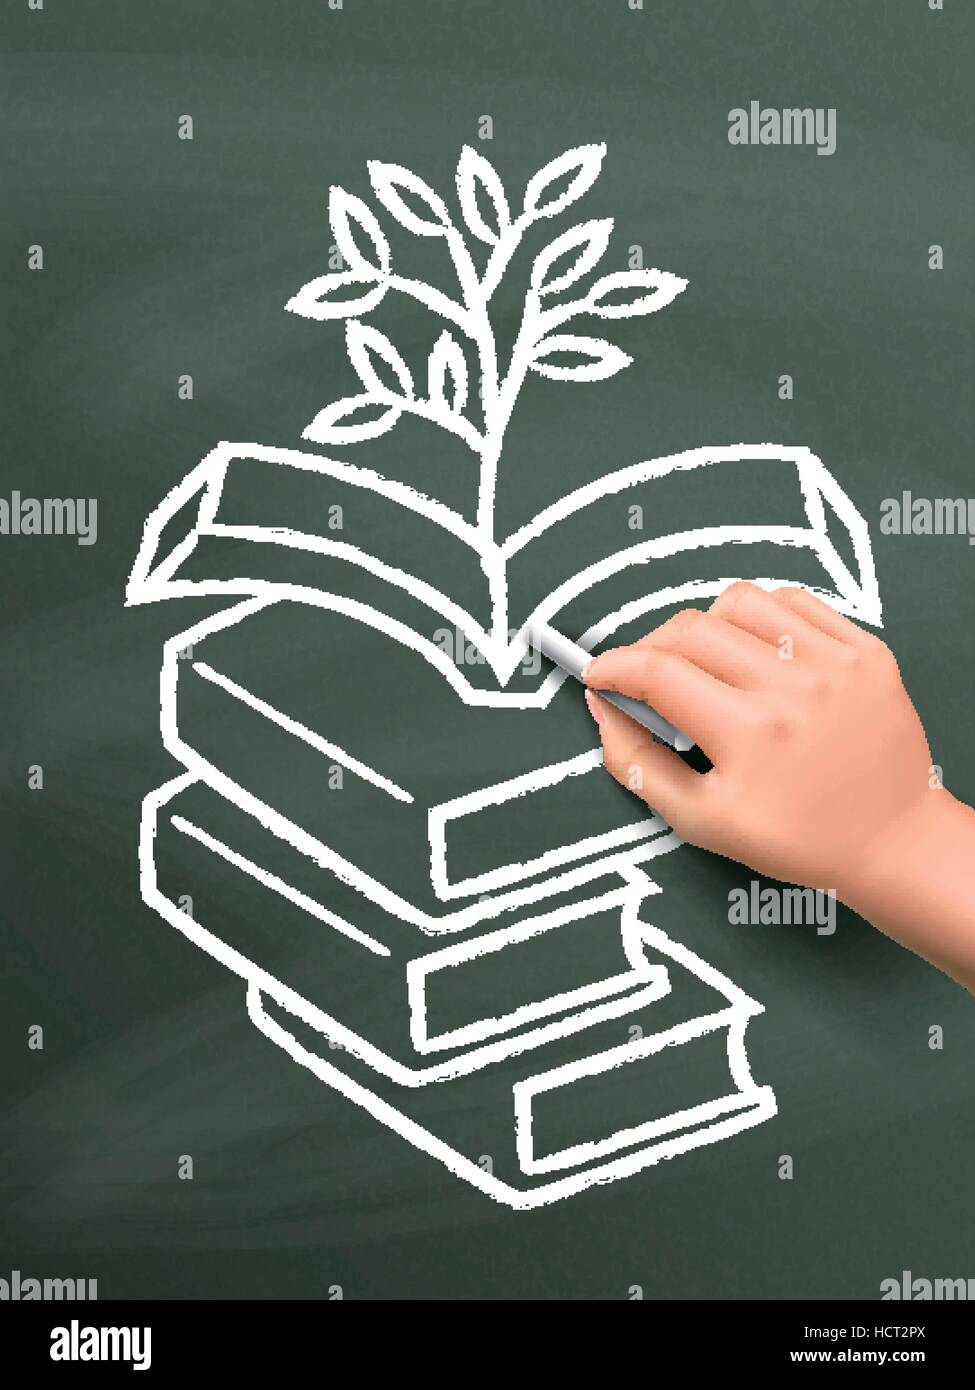 plant grows from books drawn by hand over chalkboard Stock Vector